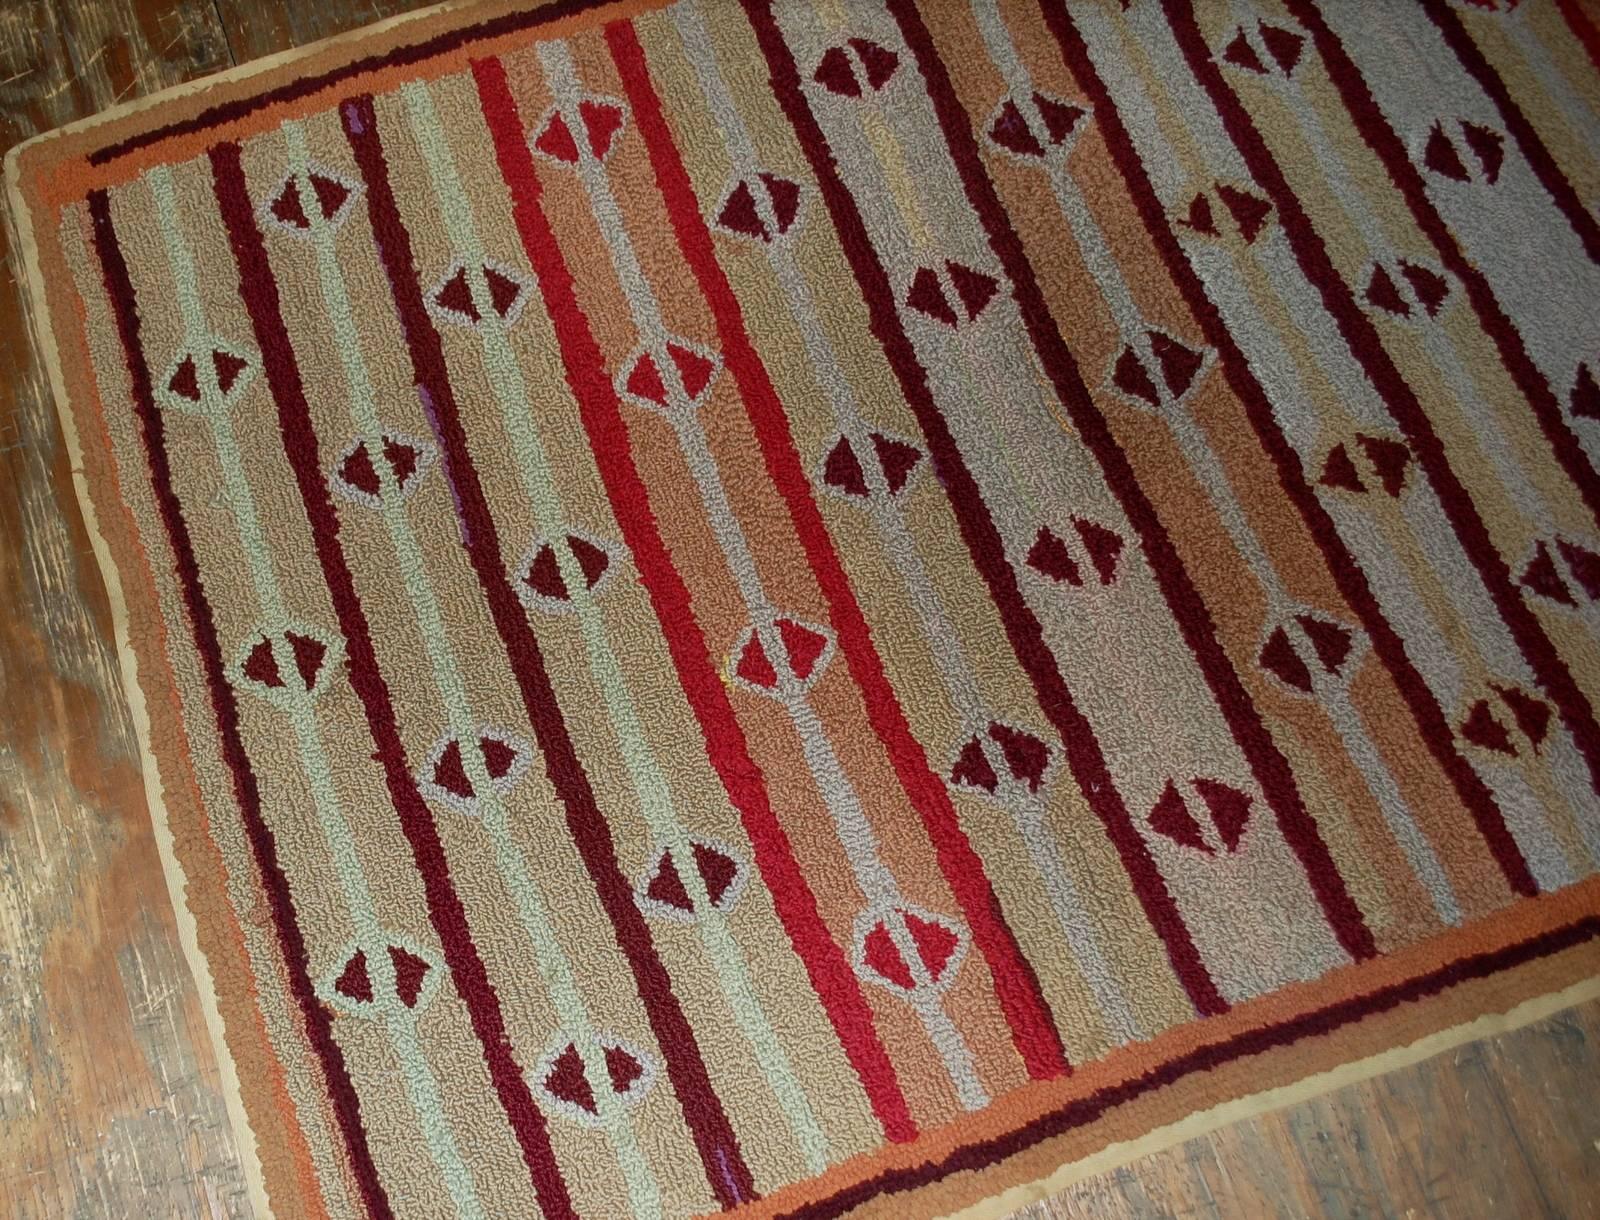 Handmade antique American hooked rug in good condition. The rug has been made in geometric design. Repeating diamond shaped pattern on colourful stripes all over the rug. Very thin burgundy border surrounding the rug. The rug is in original good